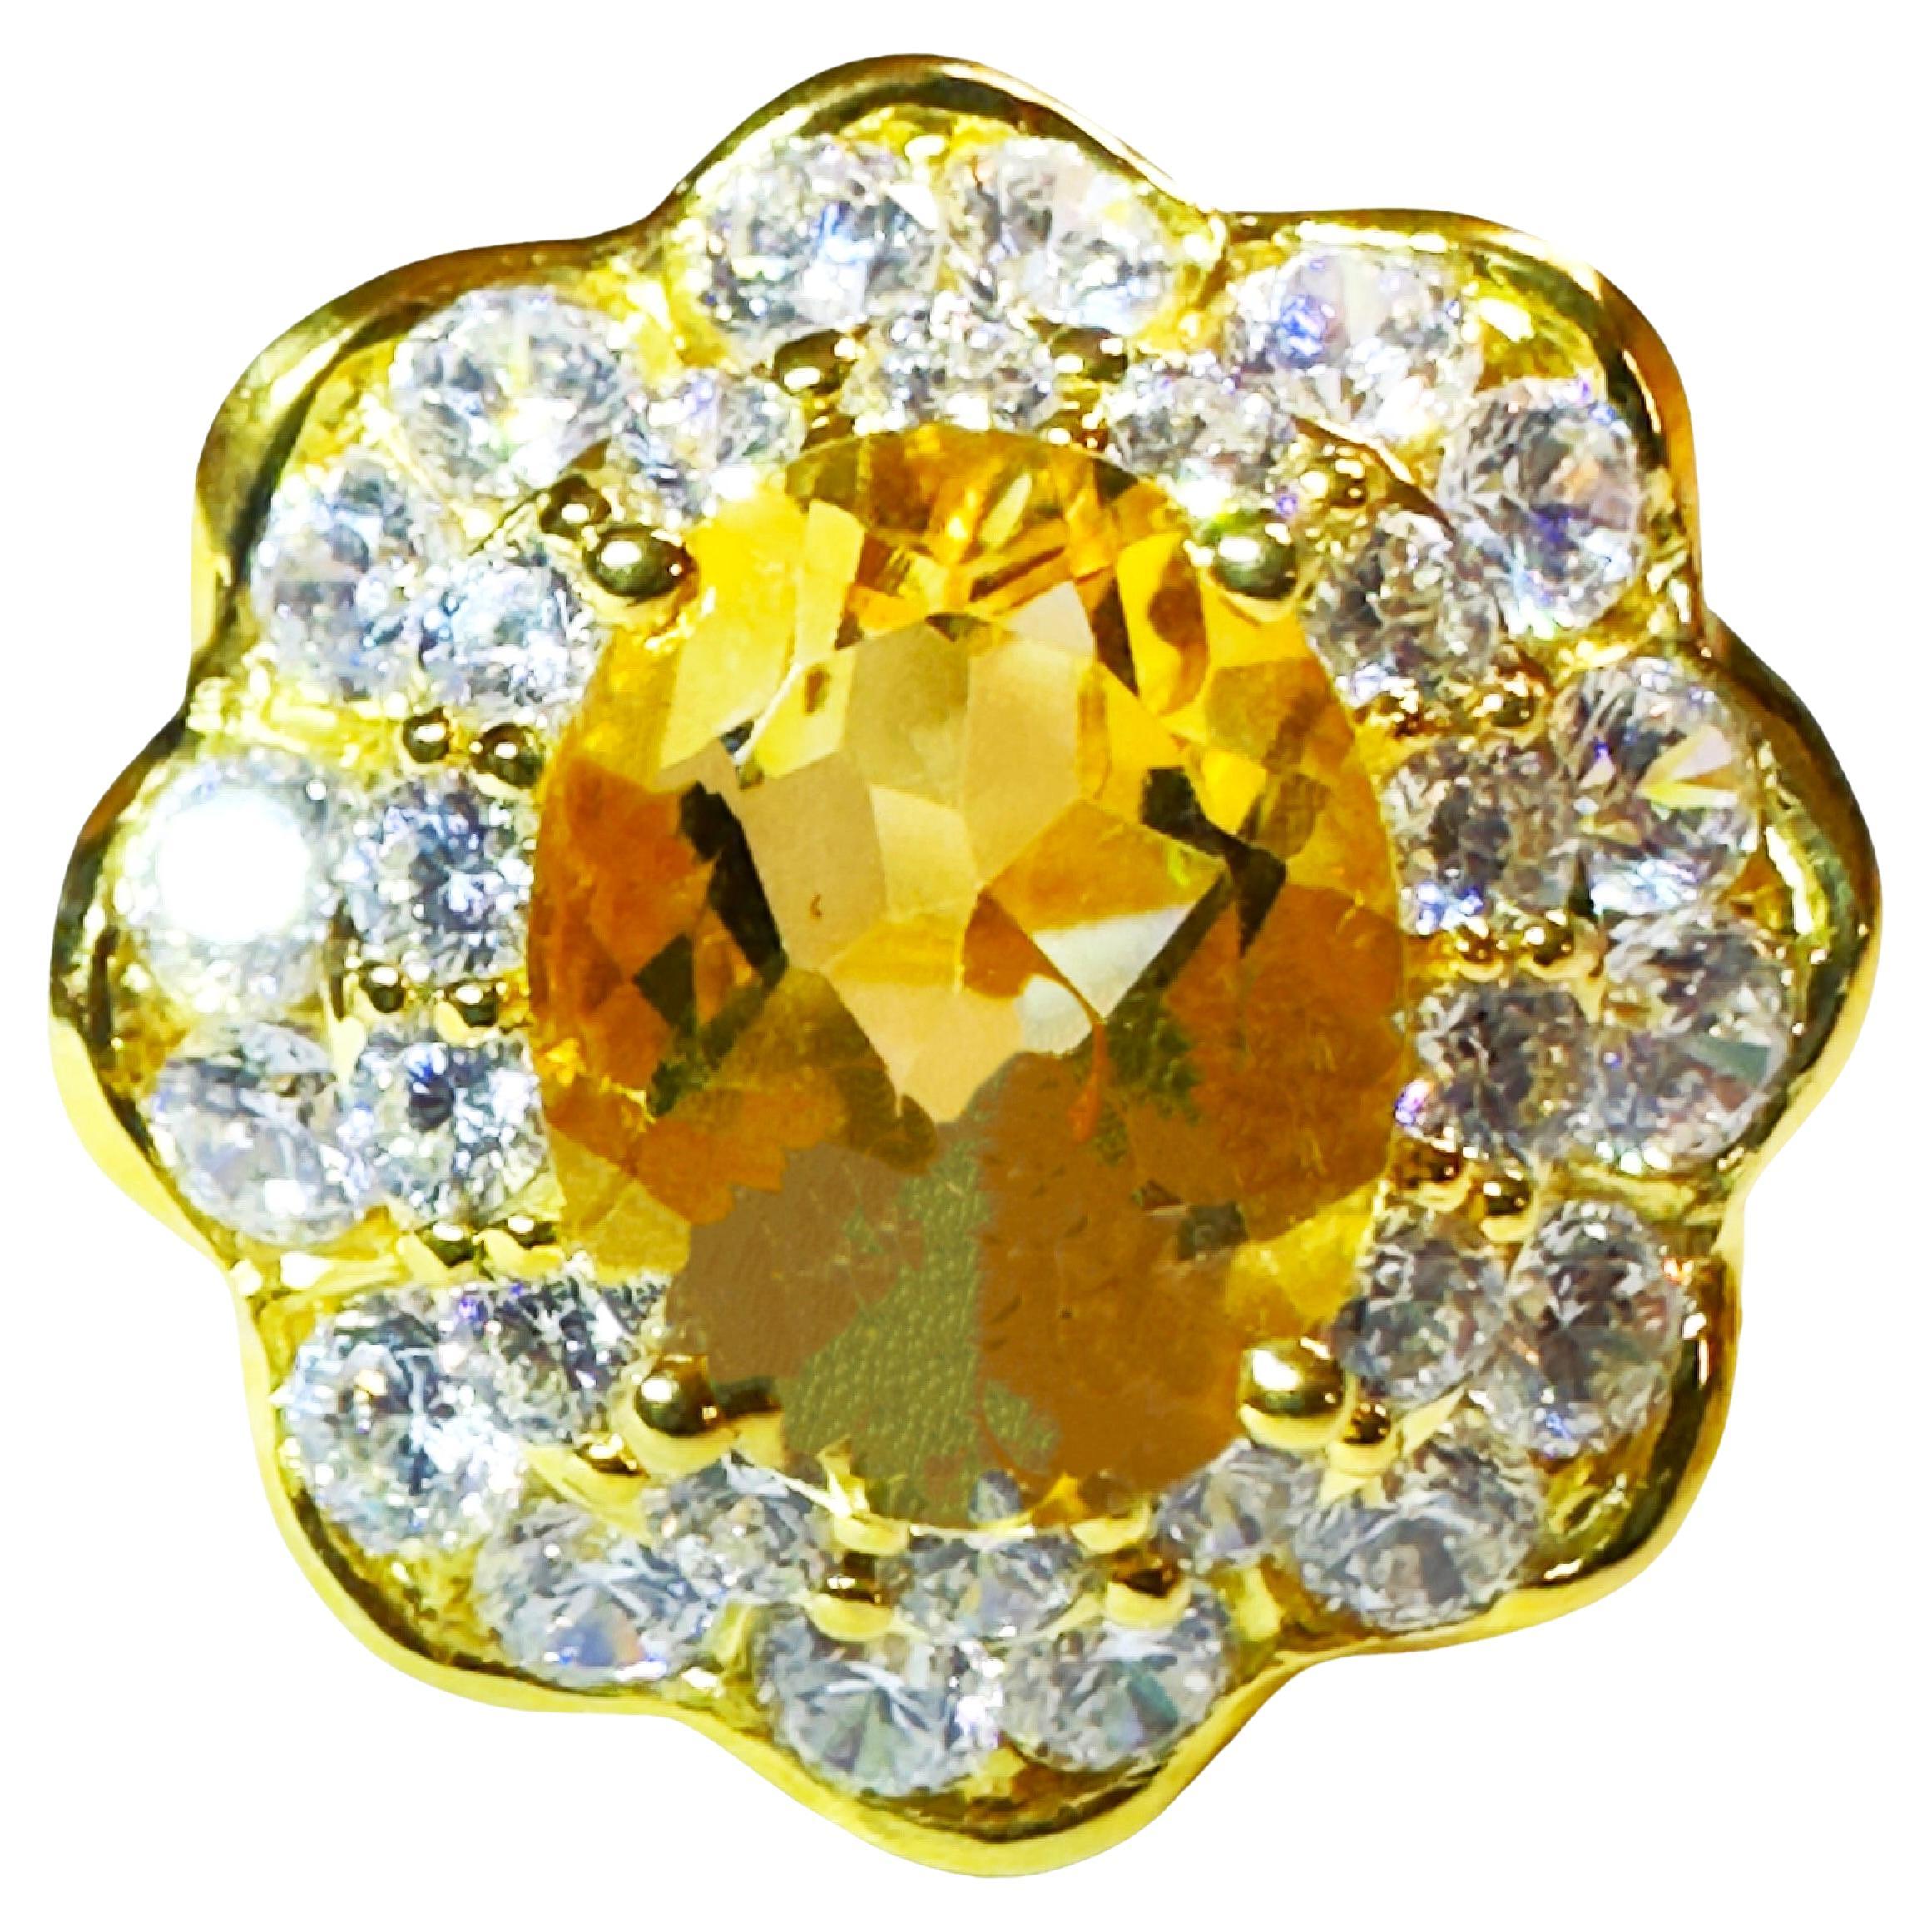 New IF Brazilian 3.40 Ct Yellow Citrine & Sapphire YGold Plated Sterling Ring